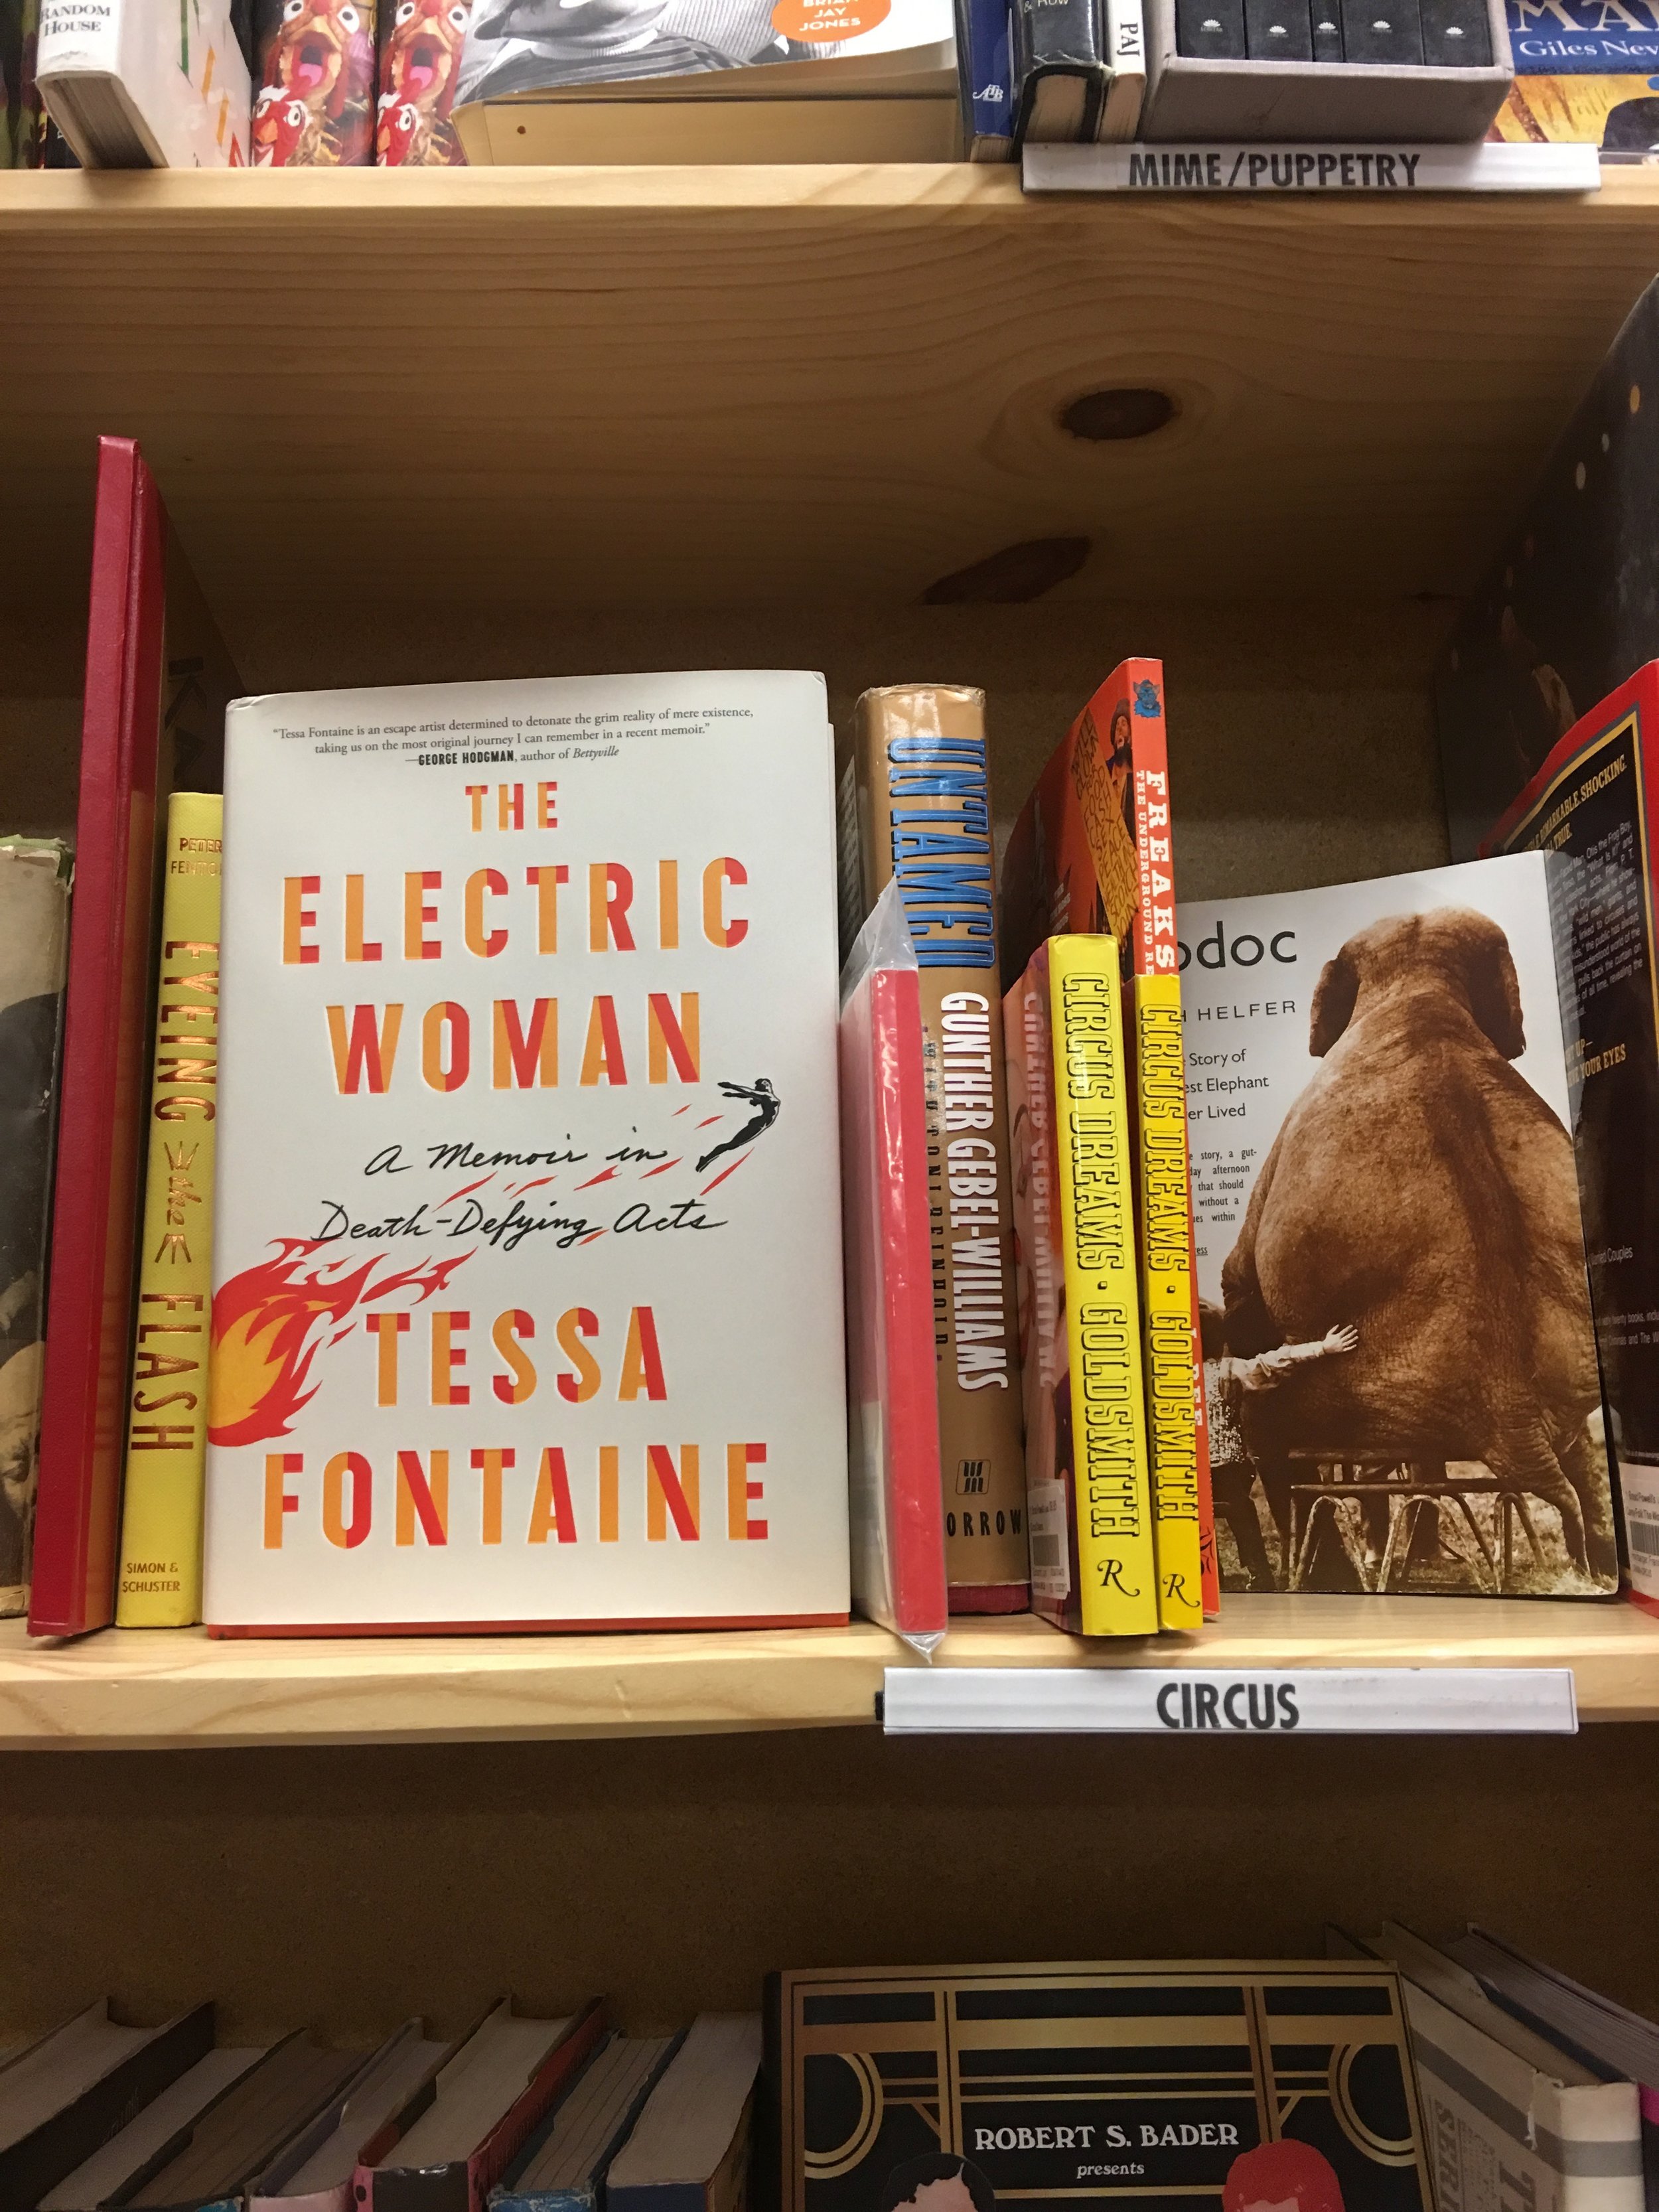  Only Powell’s would have a “Circus” shelf for Tessa’s book! 